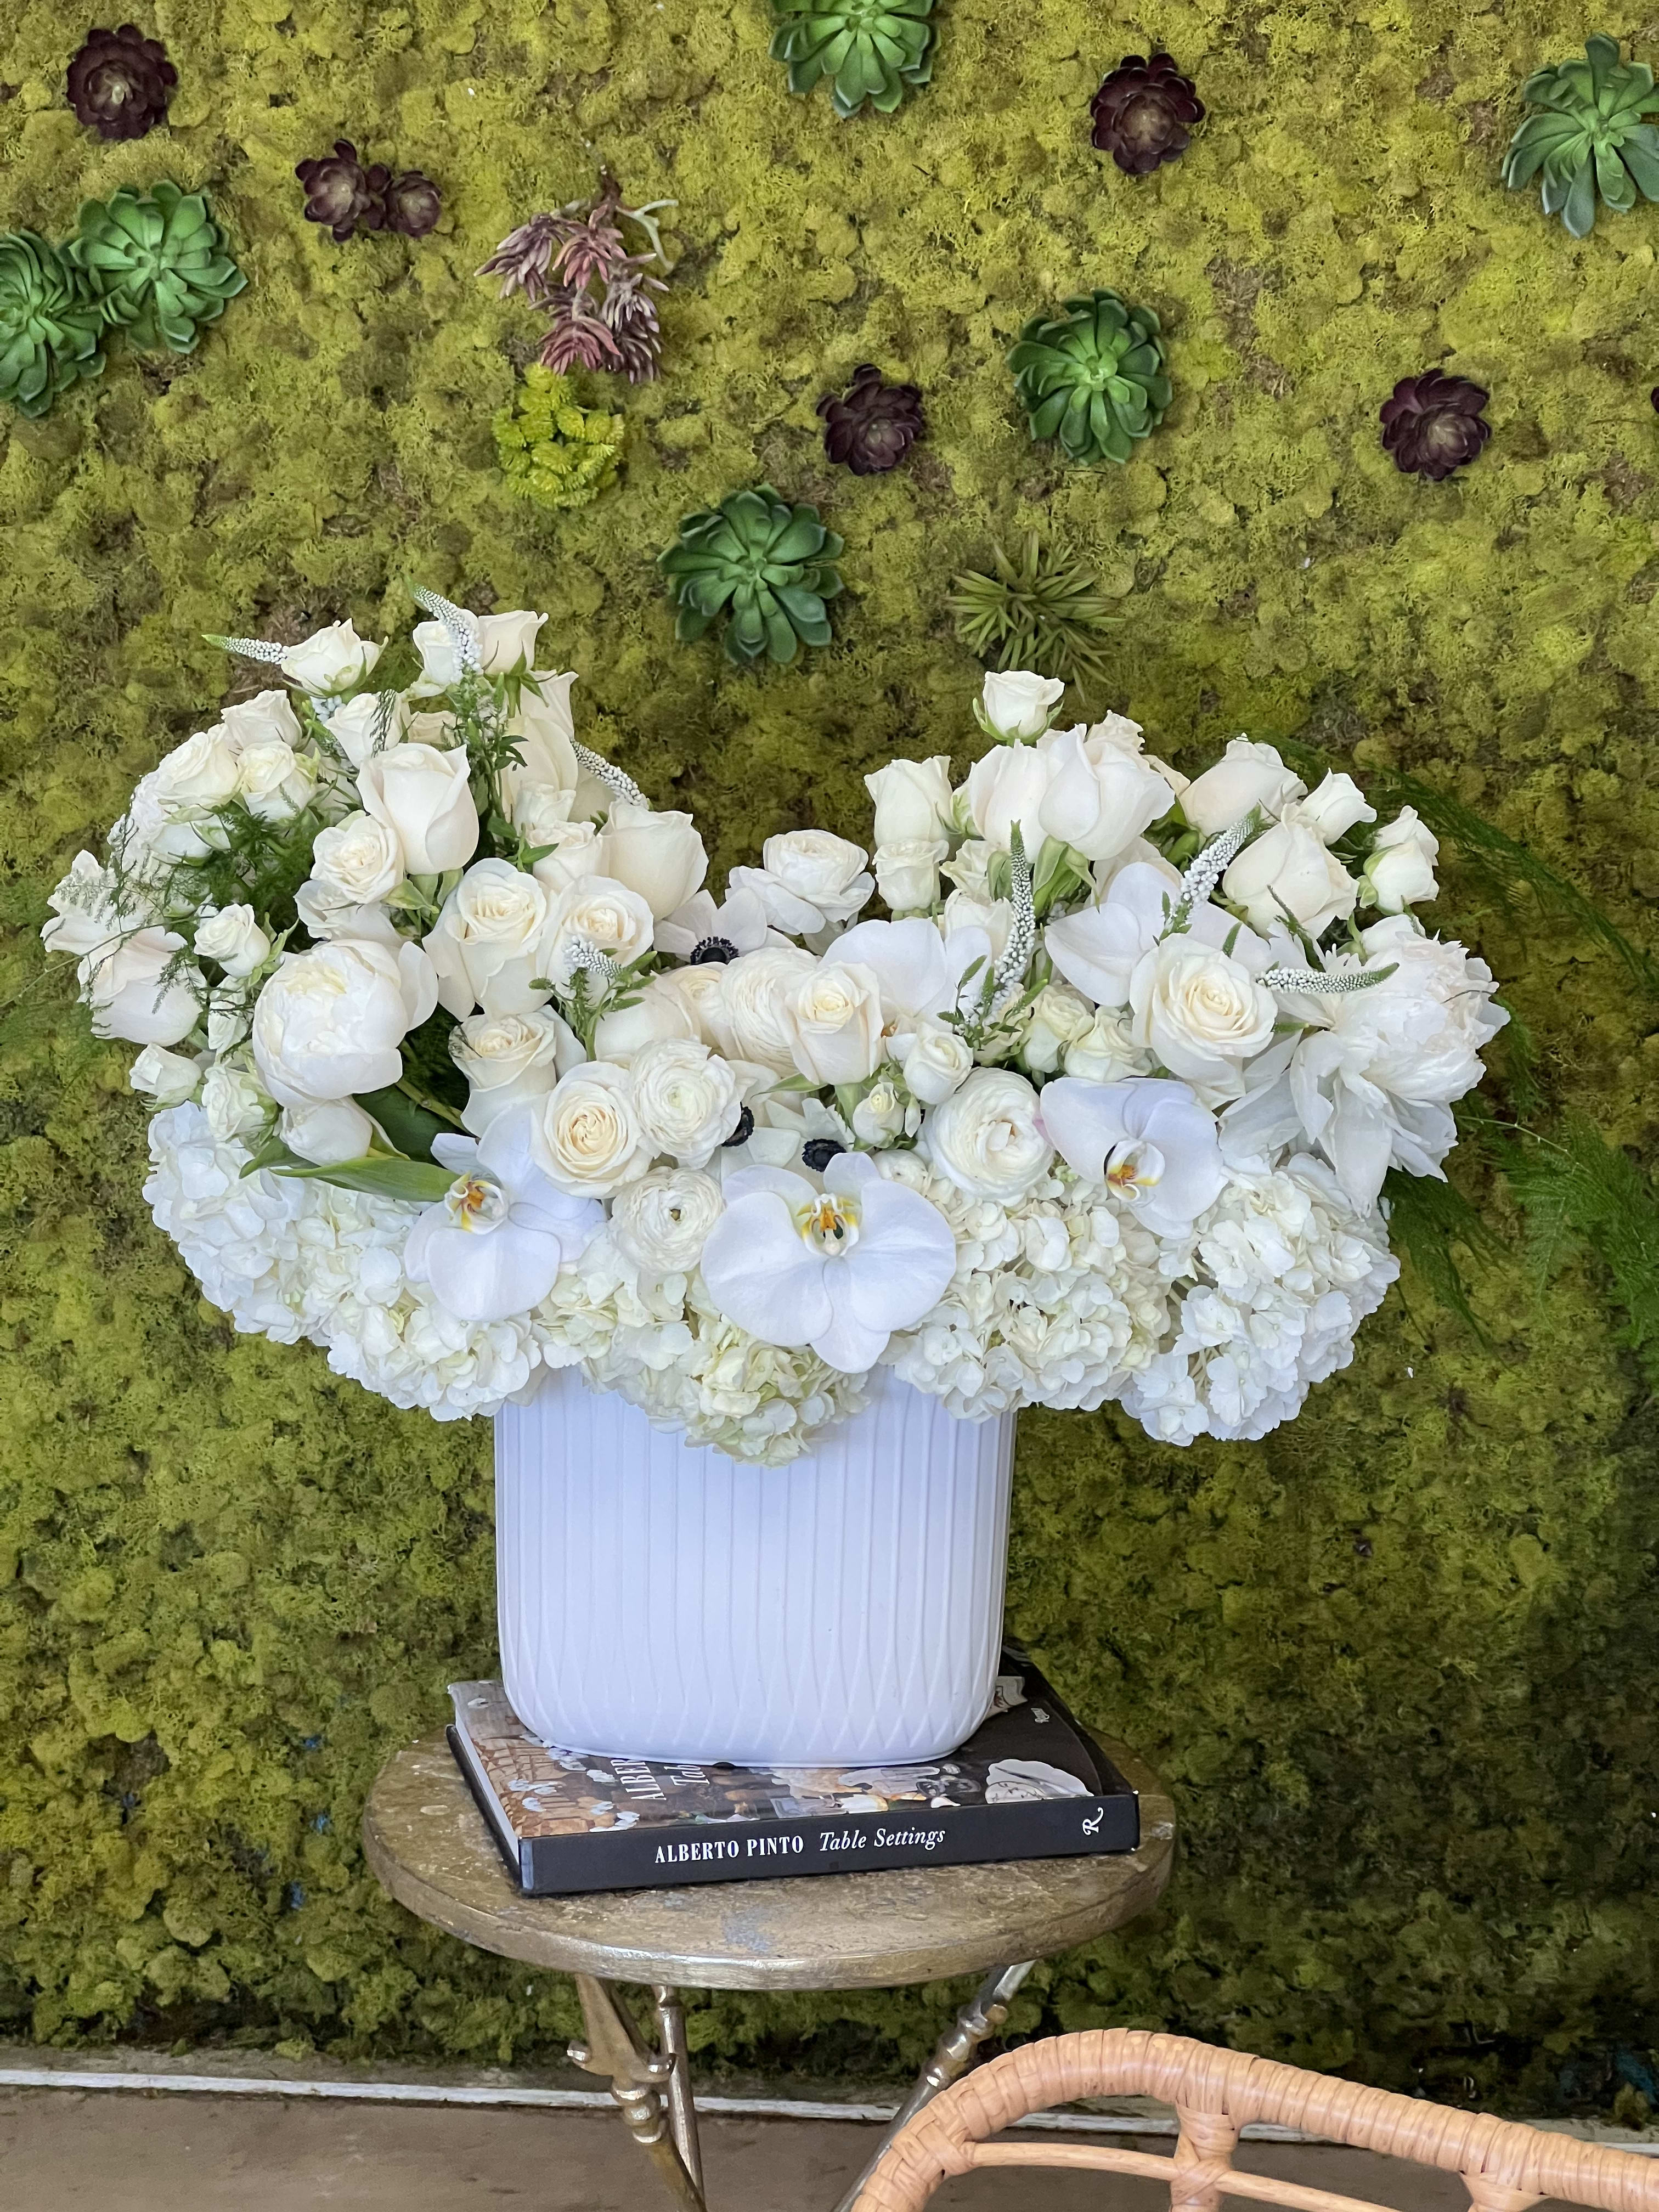 Pure Elegance - A beautiful collection of luxurious white blooms in a stylish white ceramic vase